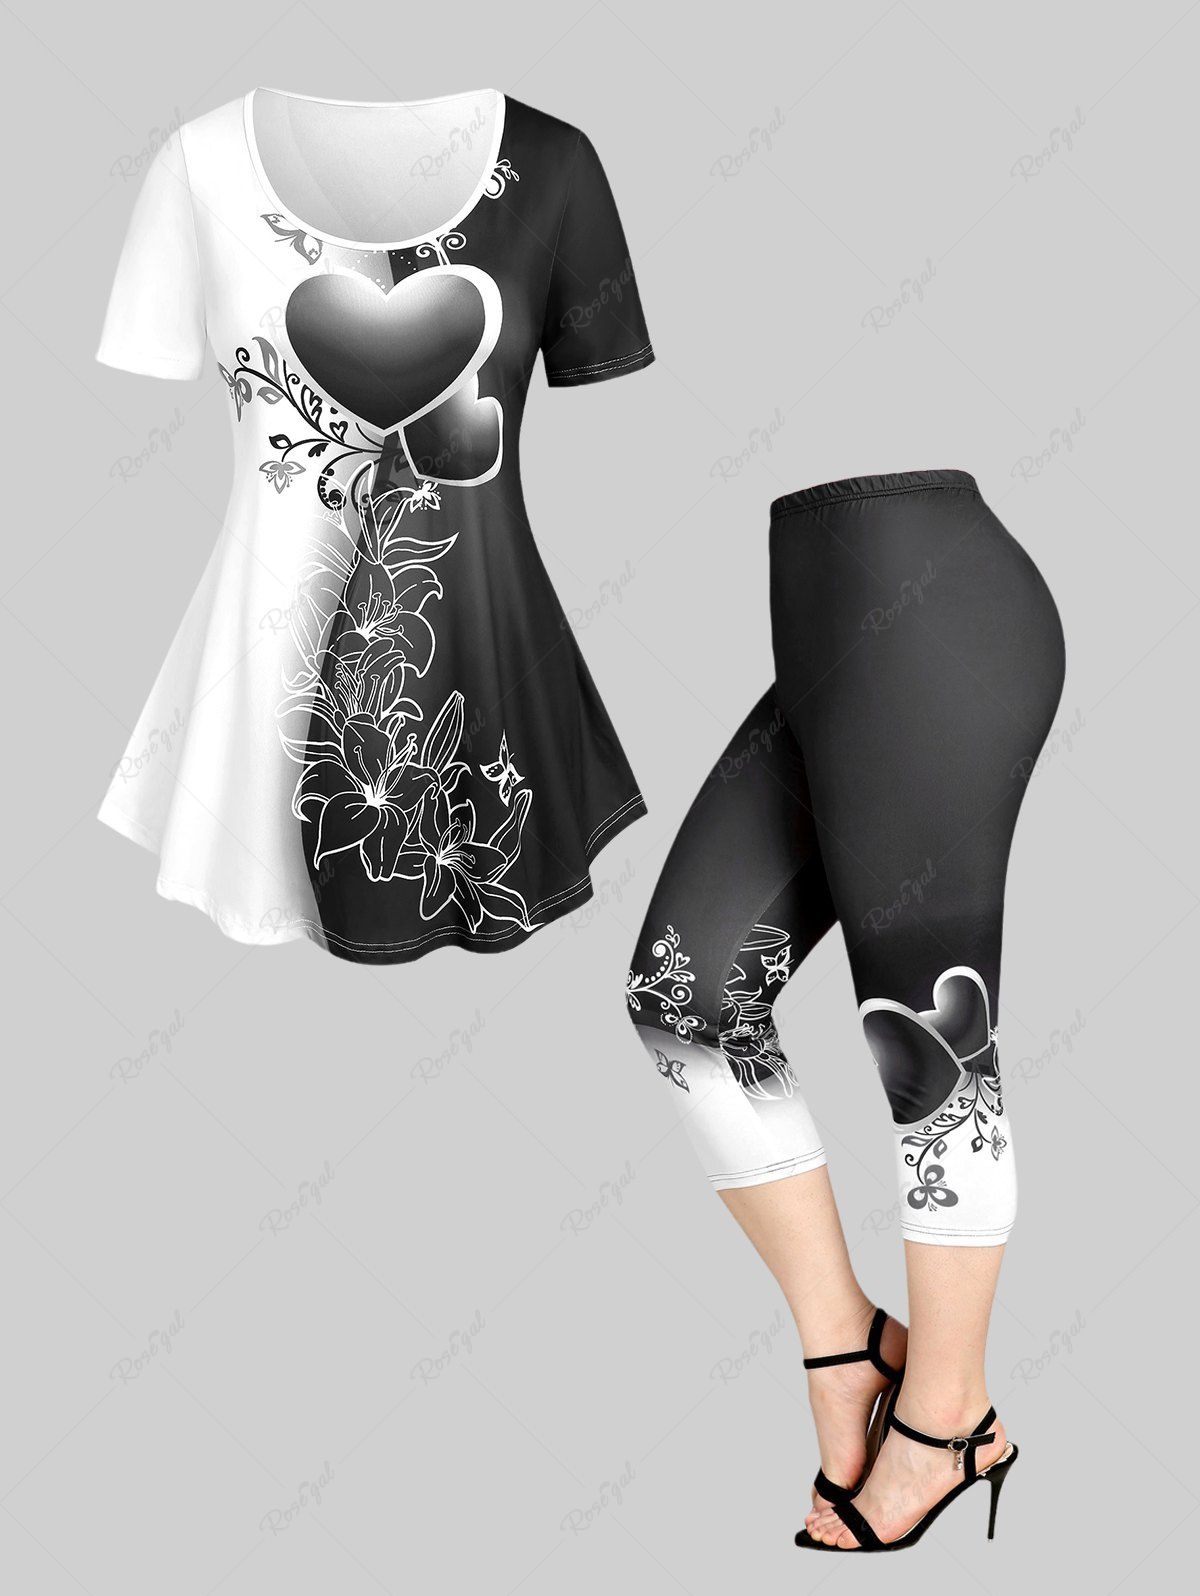 Buy Heart Floral Print Colorblock Tee and Capri Leggings Plus Size Summer Outfit  